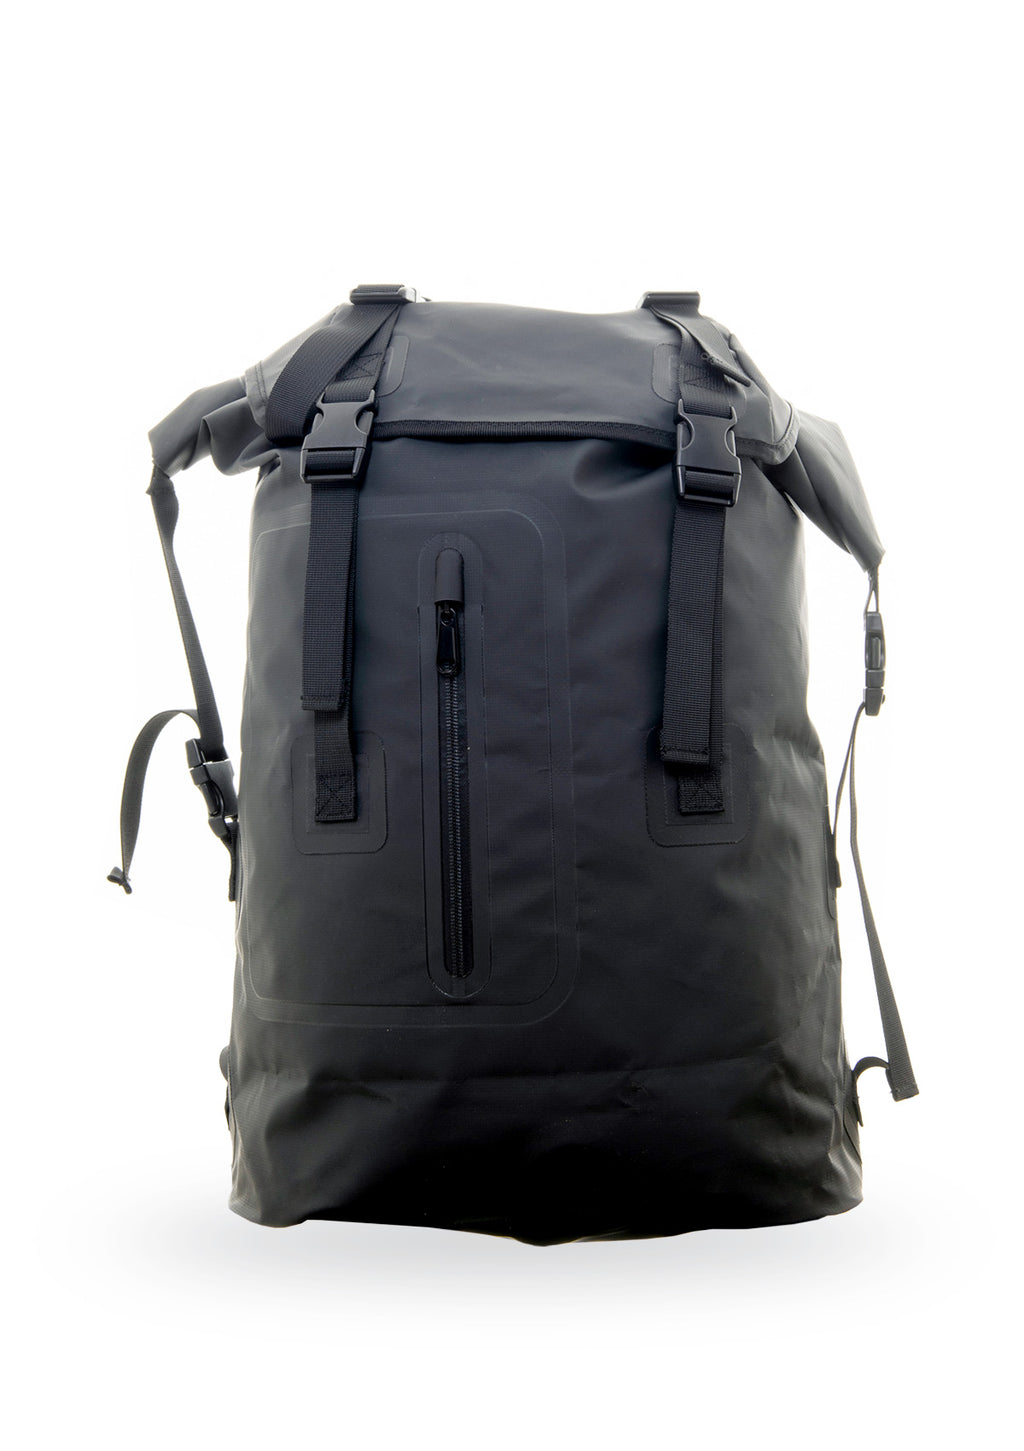 needessentials dry bag surfing black non branded 